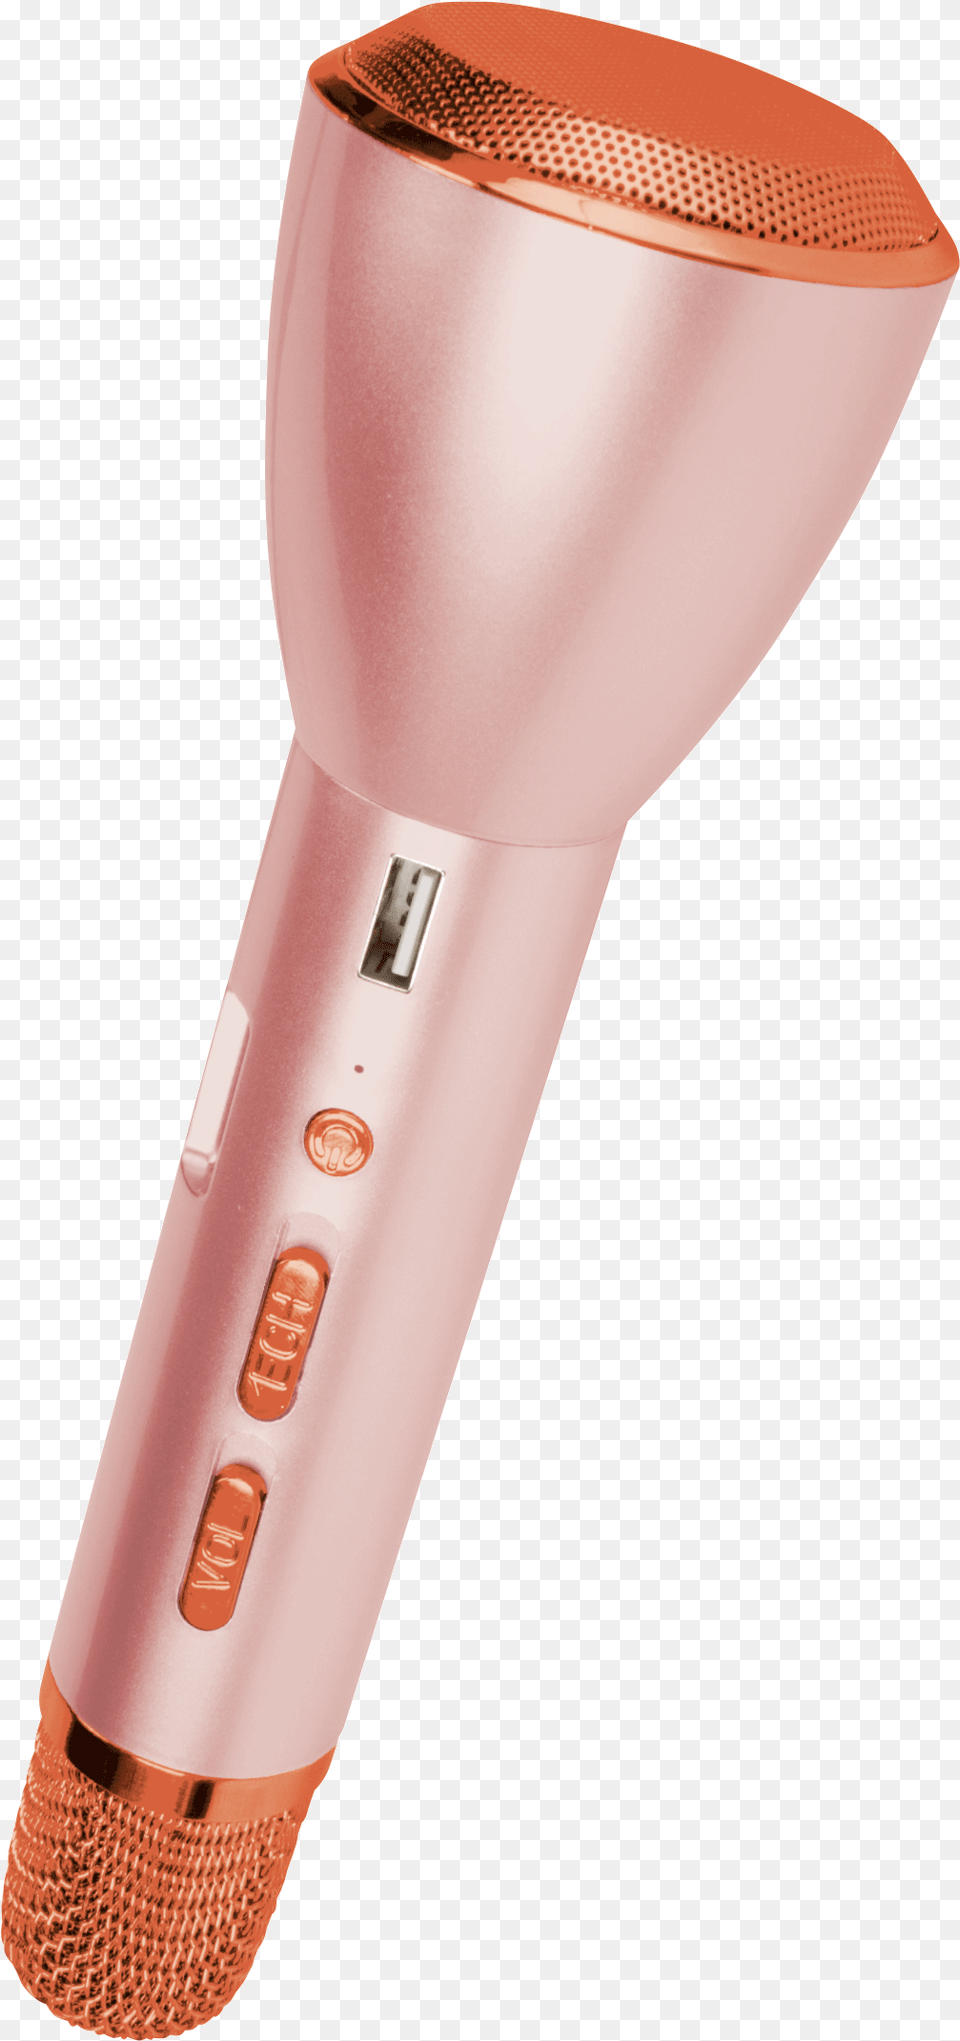 Sing Along Bluetooth Wireless Karaoke Microphone And Speaker Rose Gold Portable, Electrical Device, Lamp, Smoke Pipe Png Image